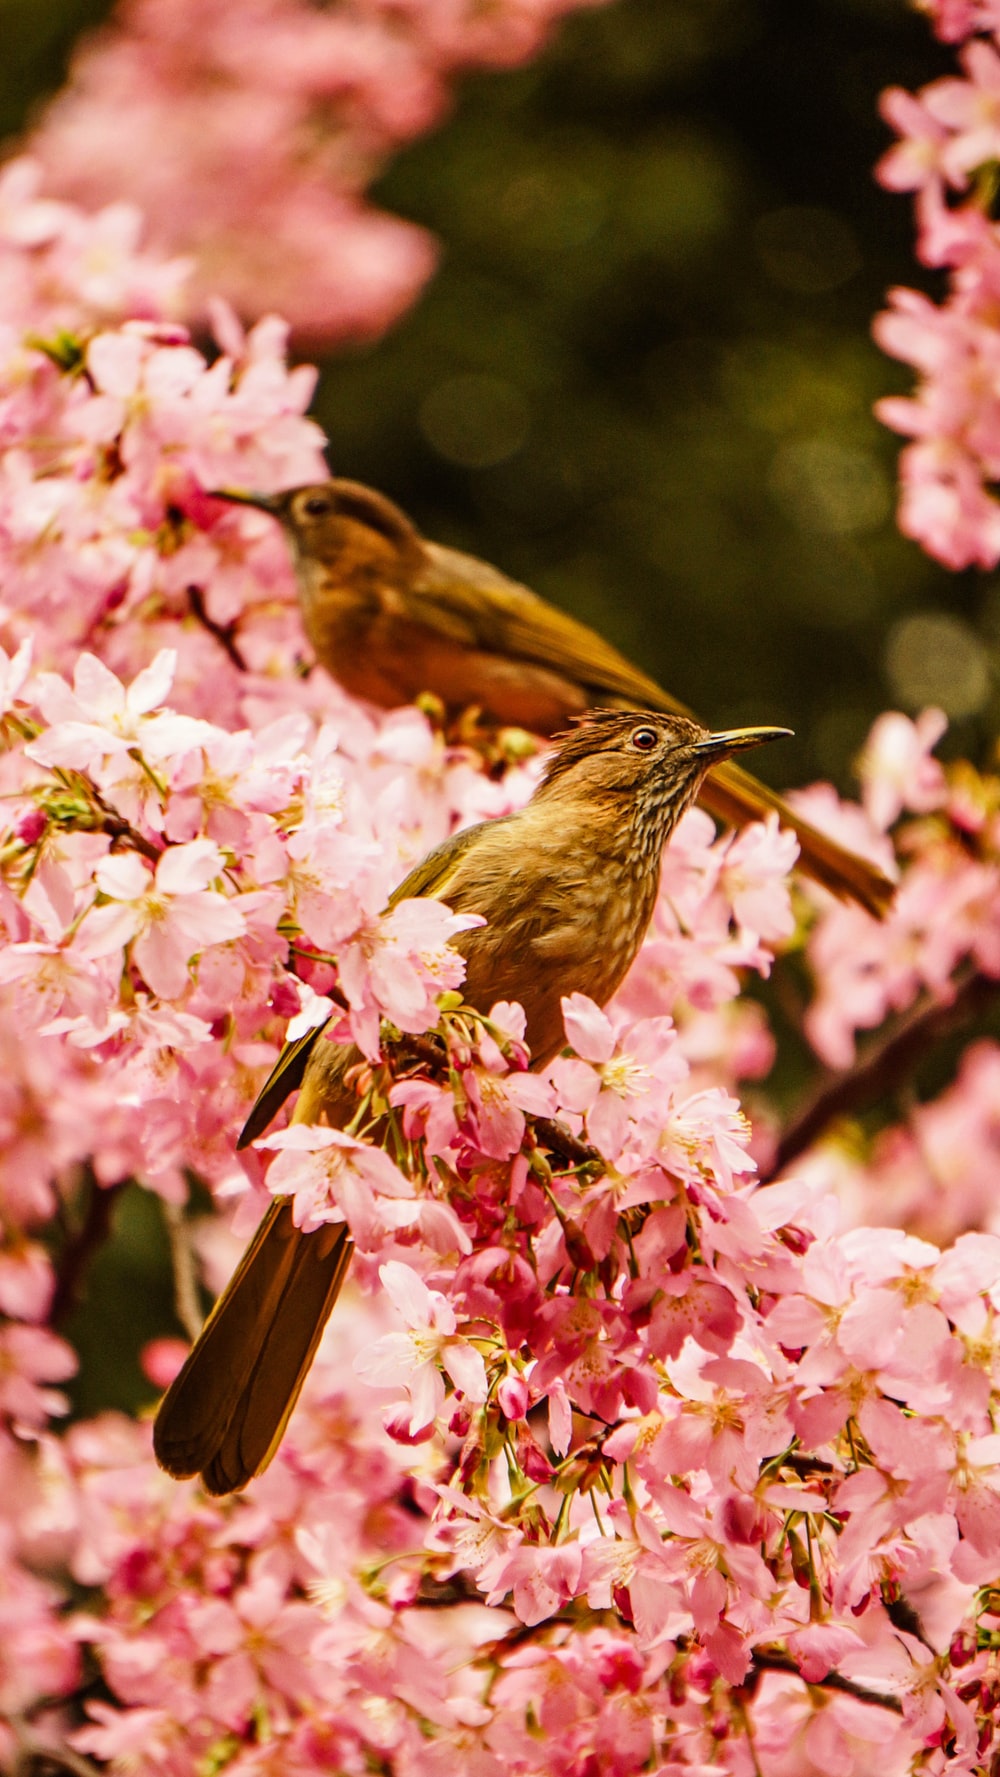 Flowers And Birds Picture. Download Free Image